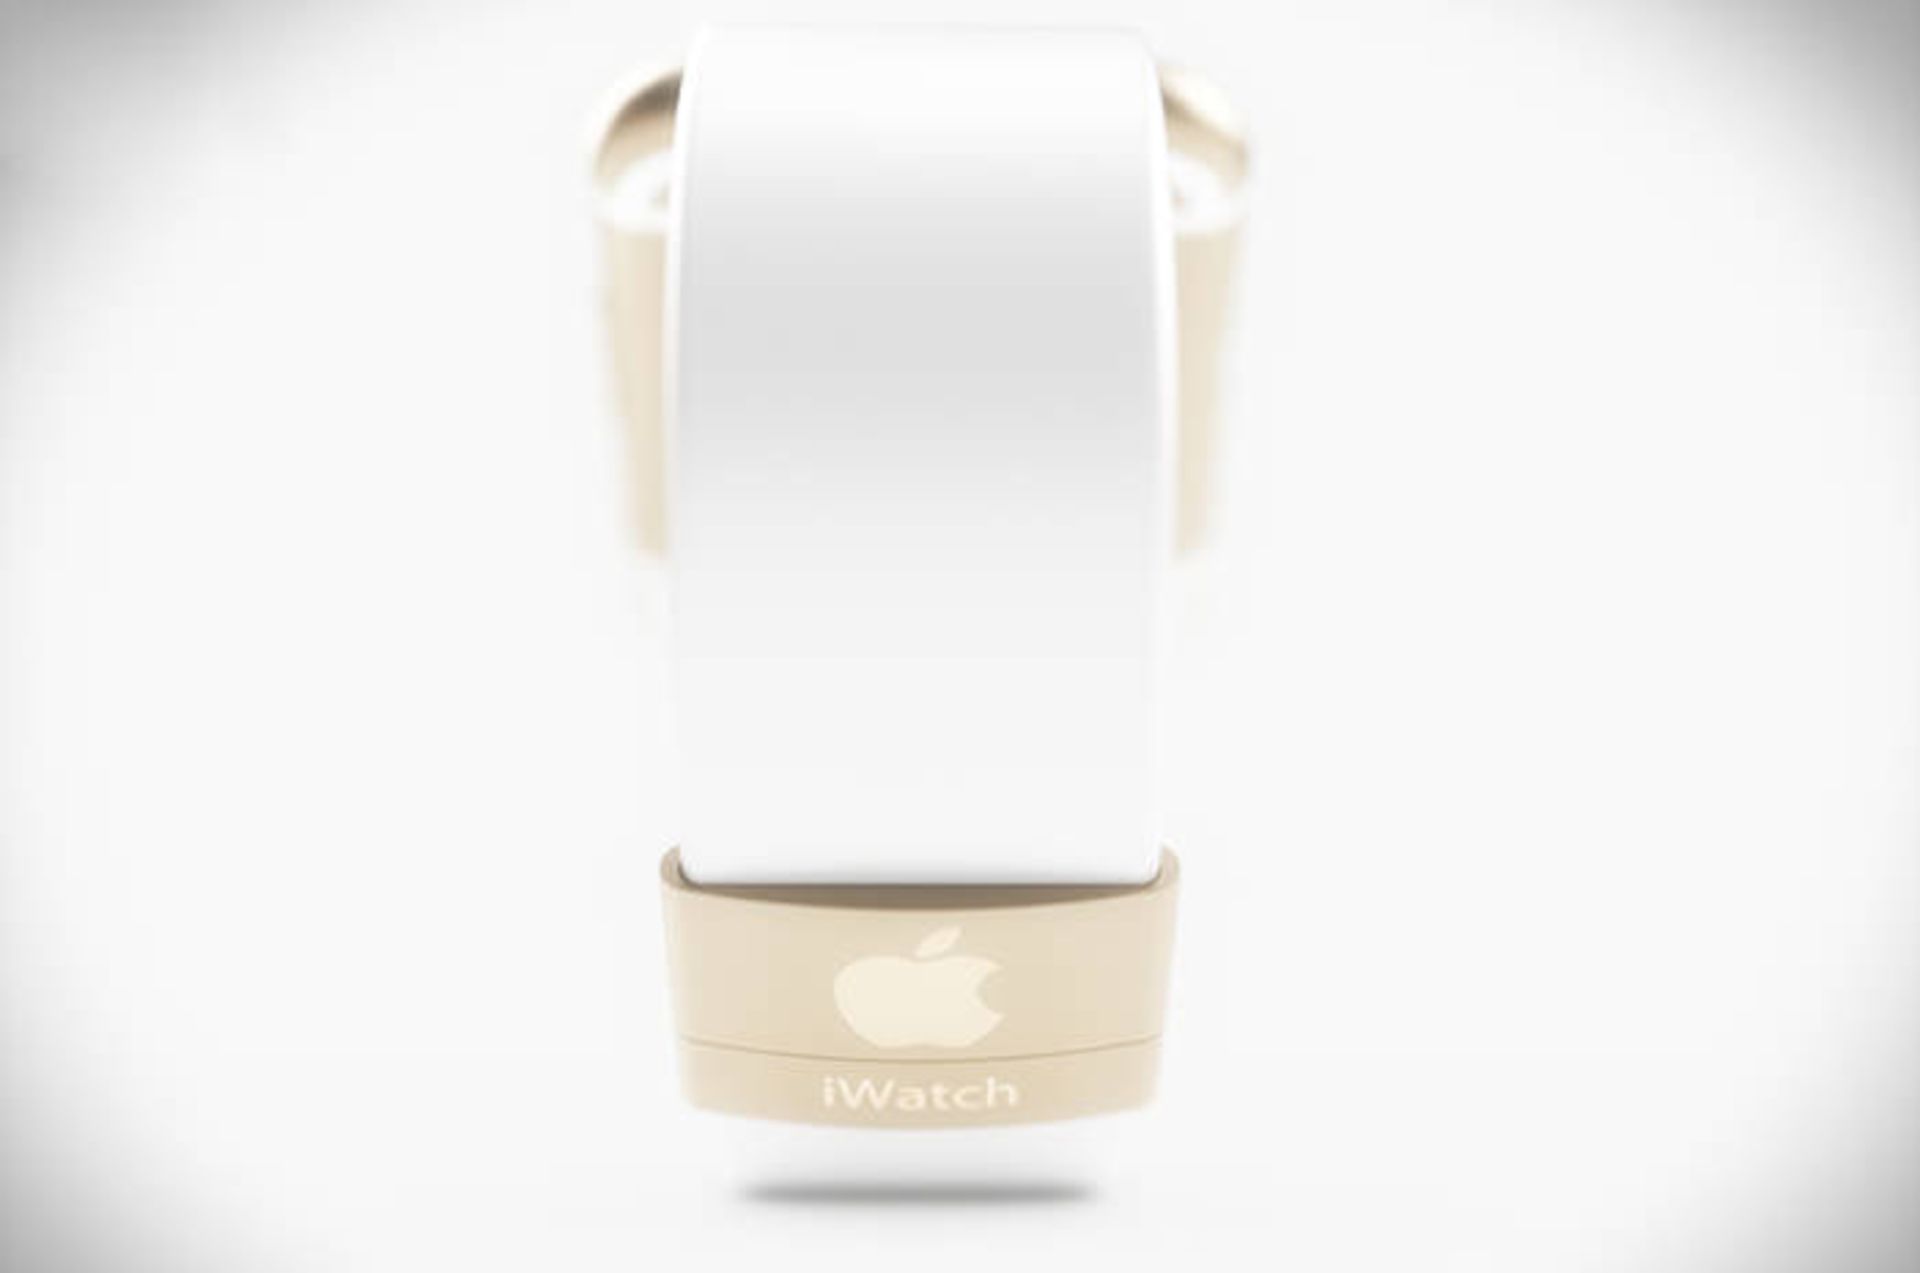 9Apple-iWatch-concept-shows-dreamy-curves-iPhone-esque-looks